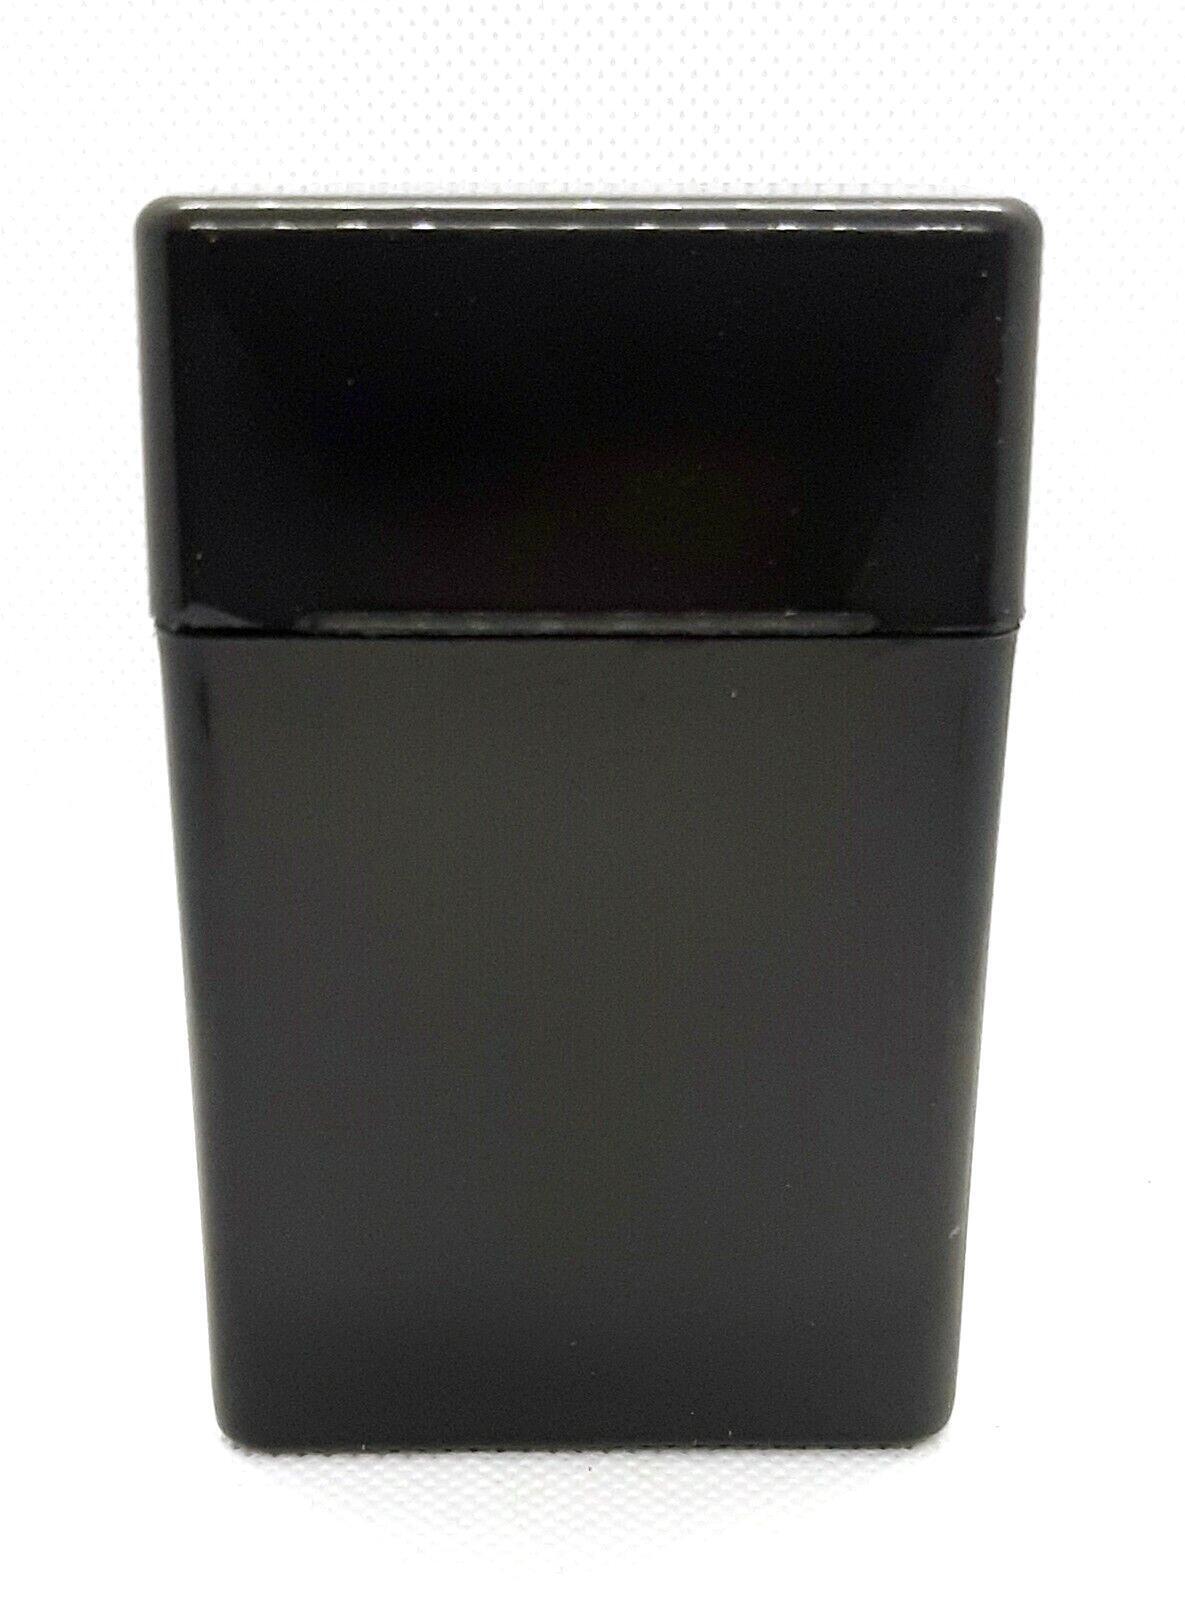 Convenient Divided Black King Size Cigarette Strong Box - Organize and Protect